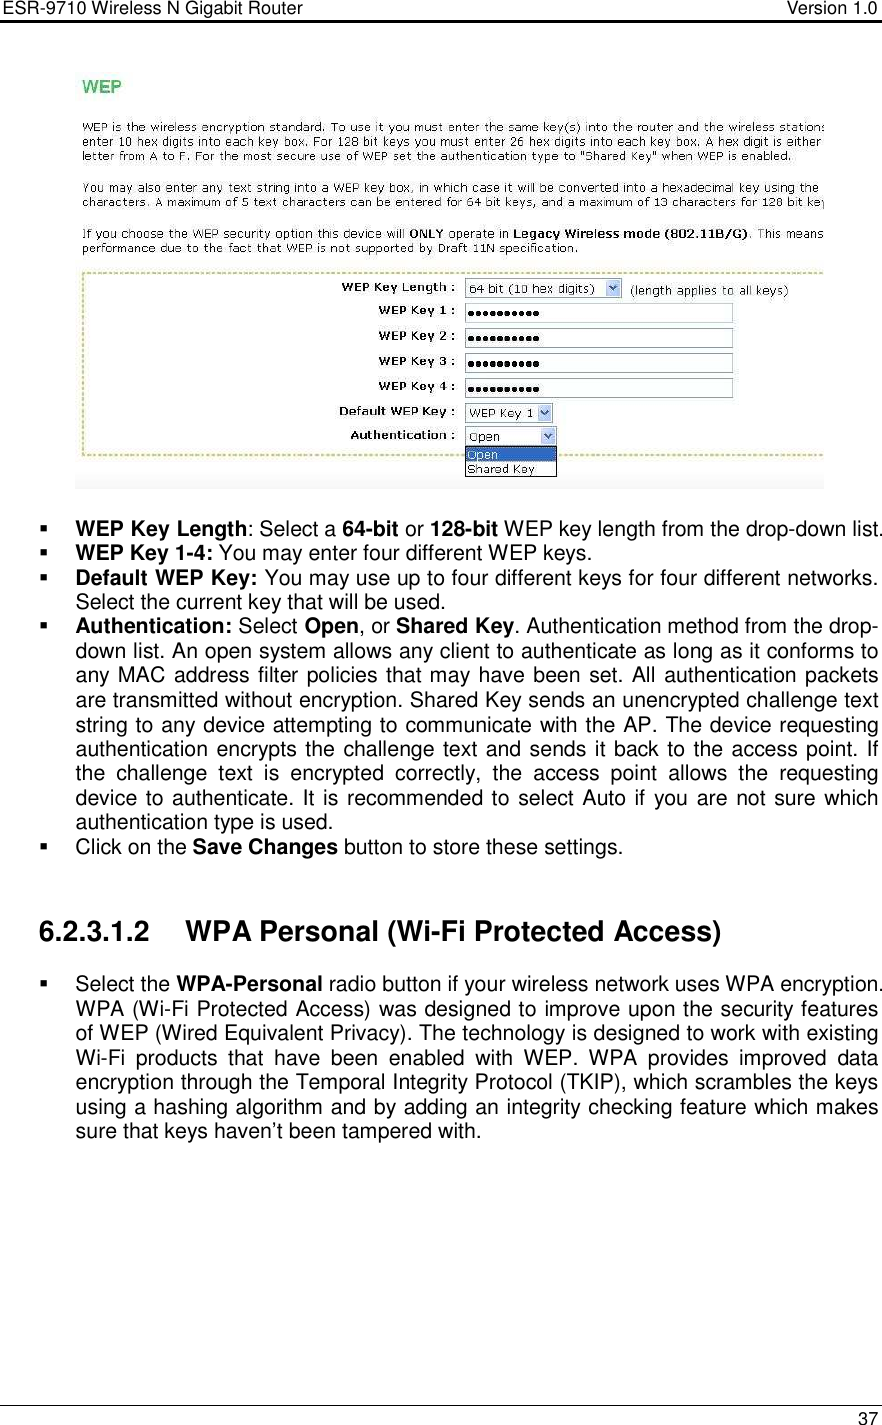 ESR-9710 Wireless N Gigabit Router                                    Version 1.0    37     WEP Key Length: Select a 64-bit or 128-bit WEP key length from the drop-down list.   WEP Key 1-4: You may enter four different WEP keys.   Default WEP Key: You may use up to four different keys for four different networks. Select the current key that will be used.   Authentication: Select Open, or Shared Key. Authentication method from the drop-down list. An open system allows any client to authenticate as long as it conforms to any MAC address filter policies that may have been set. All authentication packets are transmitted without encryption. Shared Key sends an unencrypted challenge text string to any device attempting to communicate with the AP. The device requesting authentication encrypts the challenge text and sends it back to the access point. If the  challenge  text  is  encrypted  correctly,  the  access  point  allows  the  requesting device to authenticate. It is recommended to select Auto if  you are not sure which authentication type is used.   Click on the Save Changes button to store these settings.    6.2.3.1.2  WPA Personal (Wi-Fi Protected Access)   Select the WPA-Personal radio button if your wireless network uses WPA encryption. WPA (Wi-Fi Protected Access) was designed to improve upon the security features of WEP (Wired Equivalent Privacy). The technology is designed to work with existing Wi-Fi  products  that  have  been  enabled  with  WEP.  WPA  provides  improved  data encryption through the Temporal Integrity Protocol (TKIP), which scrambles the keys using a hashing algorithm and by adding an integrity checking feature which makes sure that keys haven’t been tampered with.          